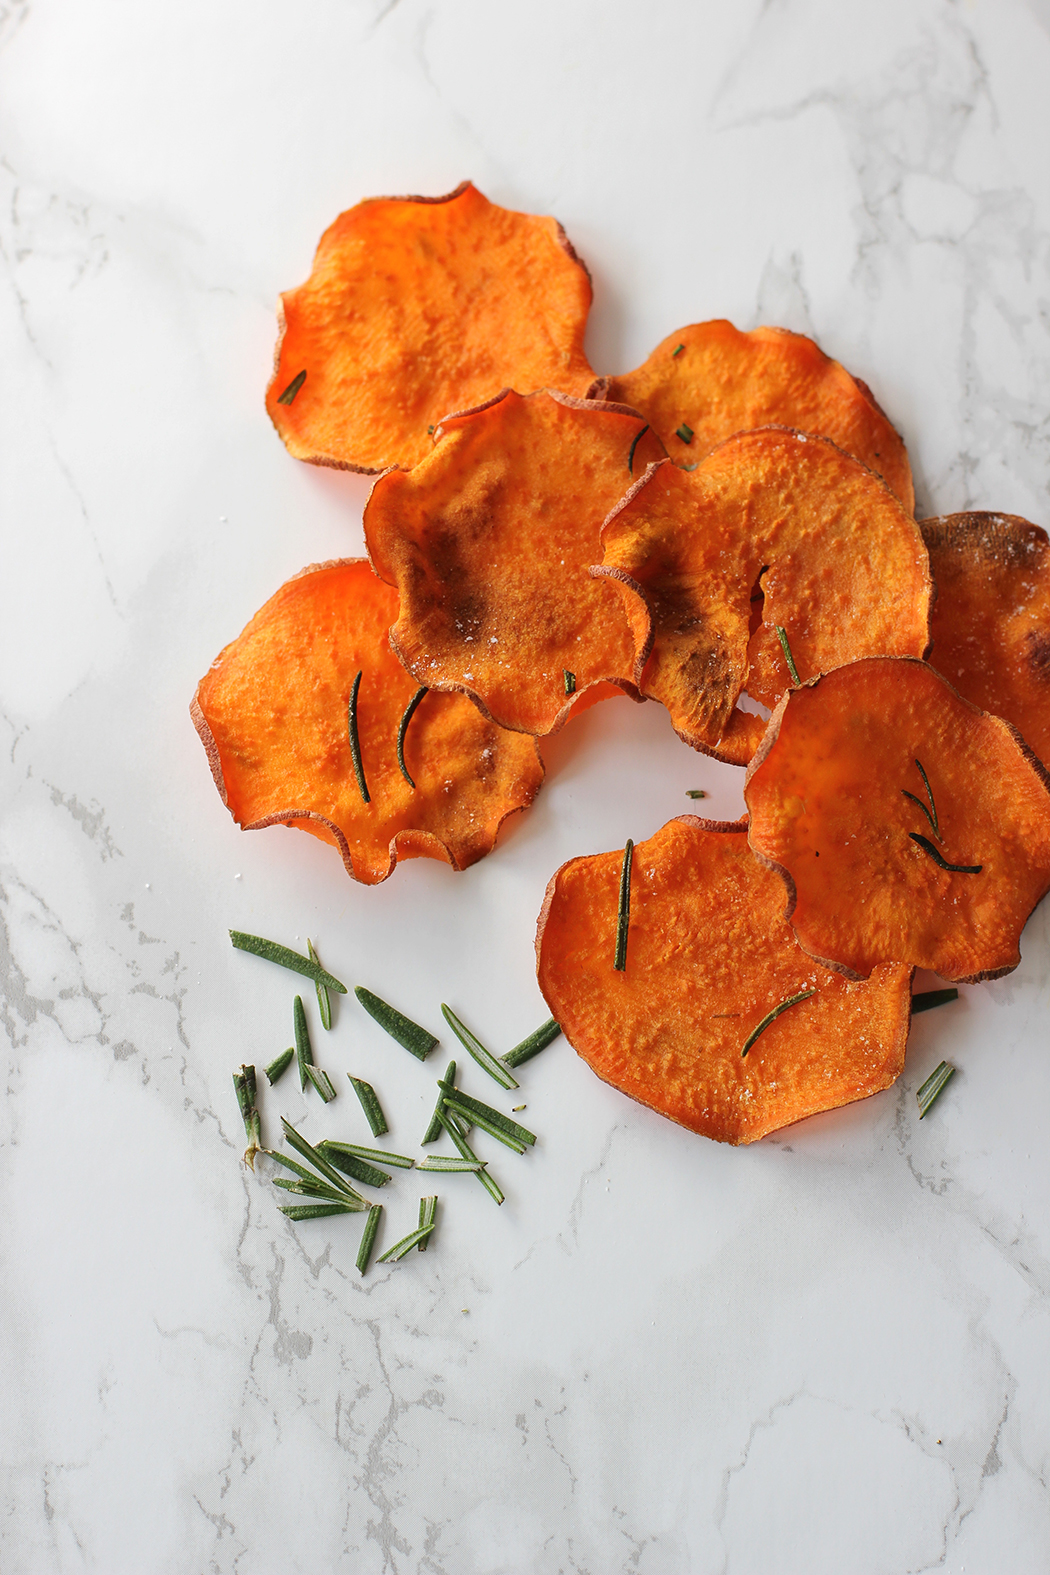 Try this baked sweet potato chips recipe! This technique makes them crispy!